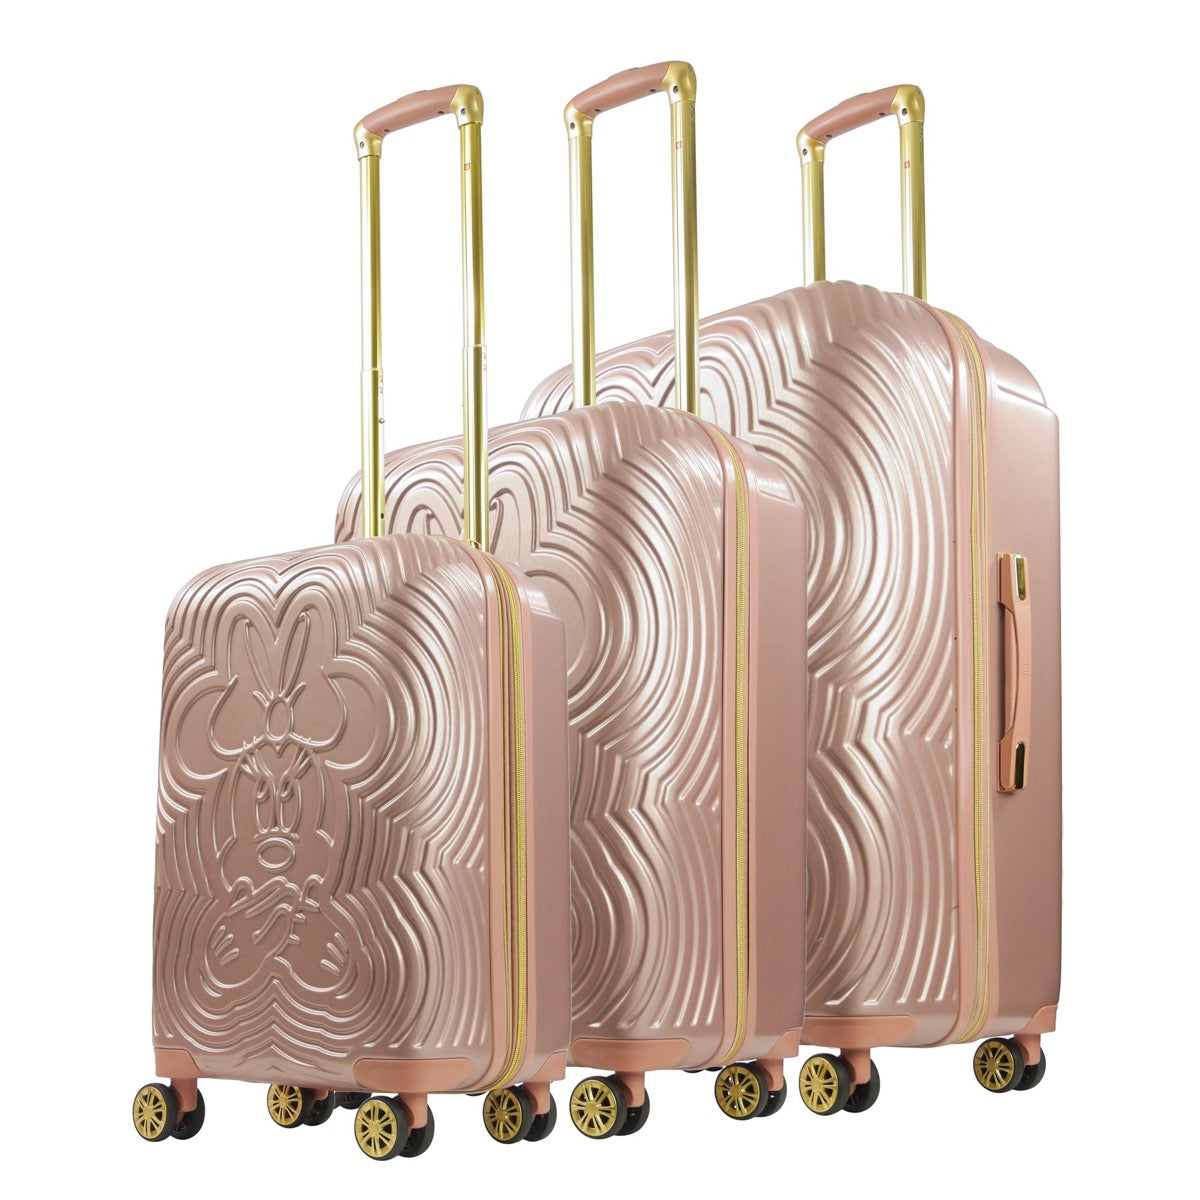 Disney Fūl Playful Minnie Mouse piece spinner suitcase Ful luggage set hard sided rose gold